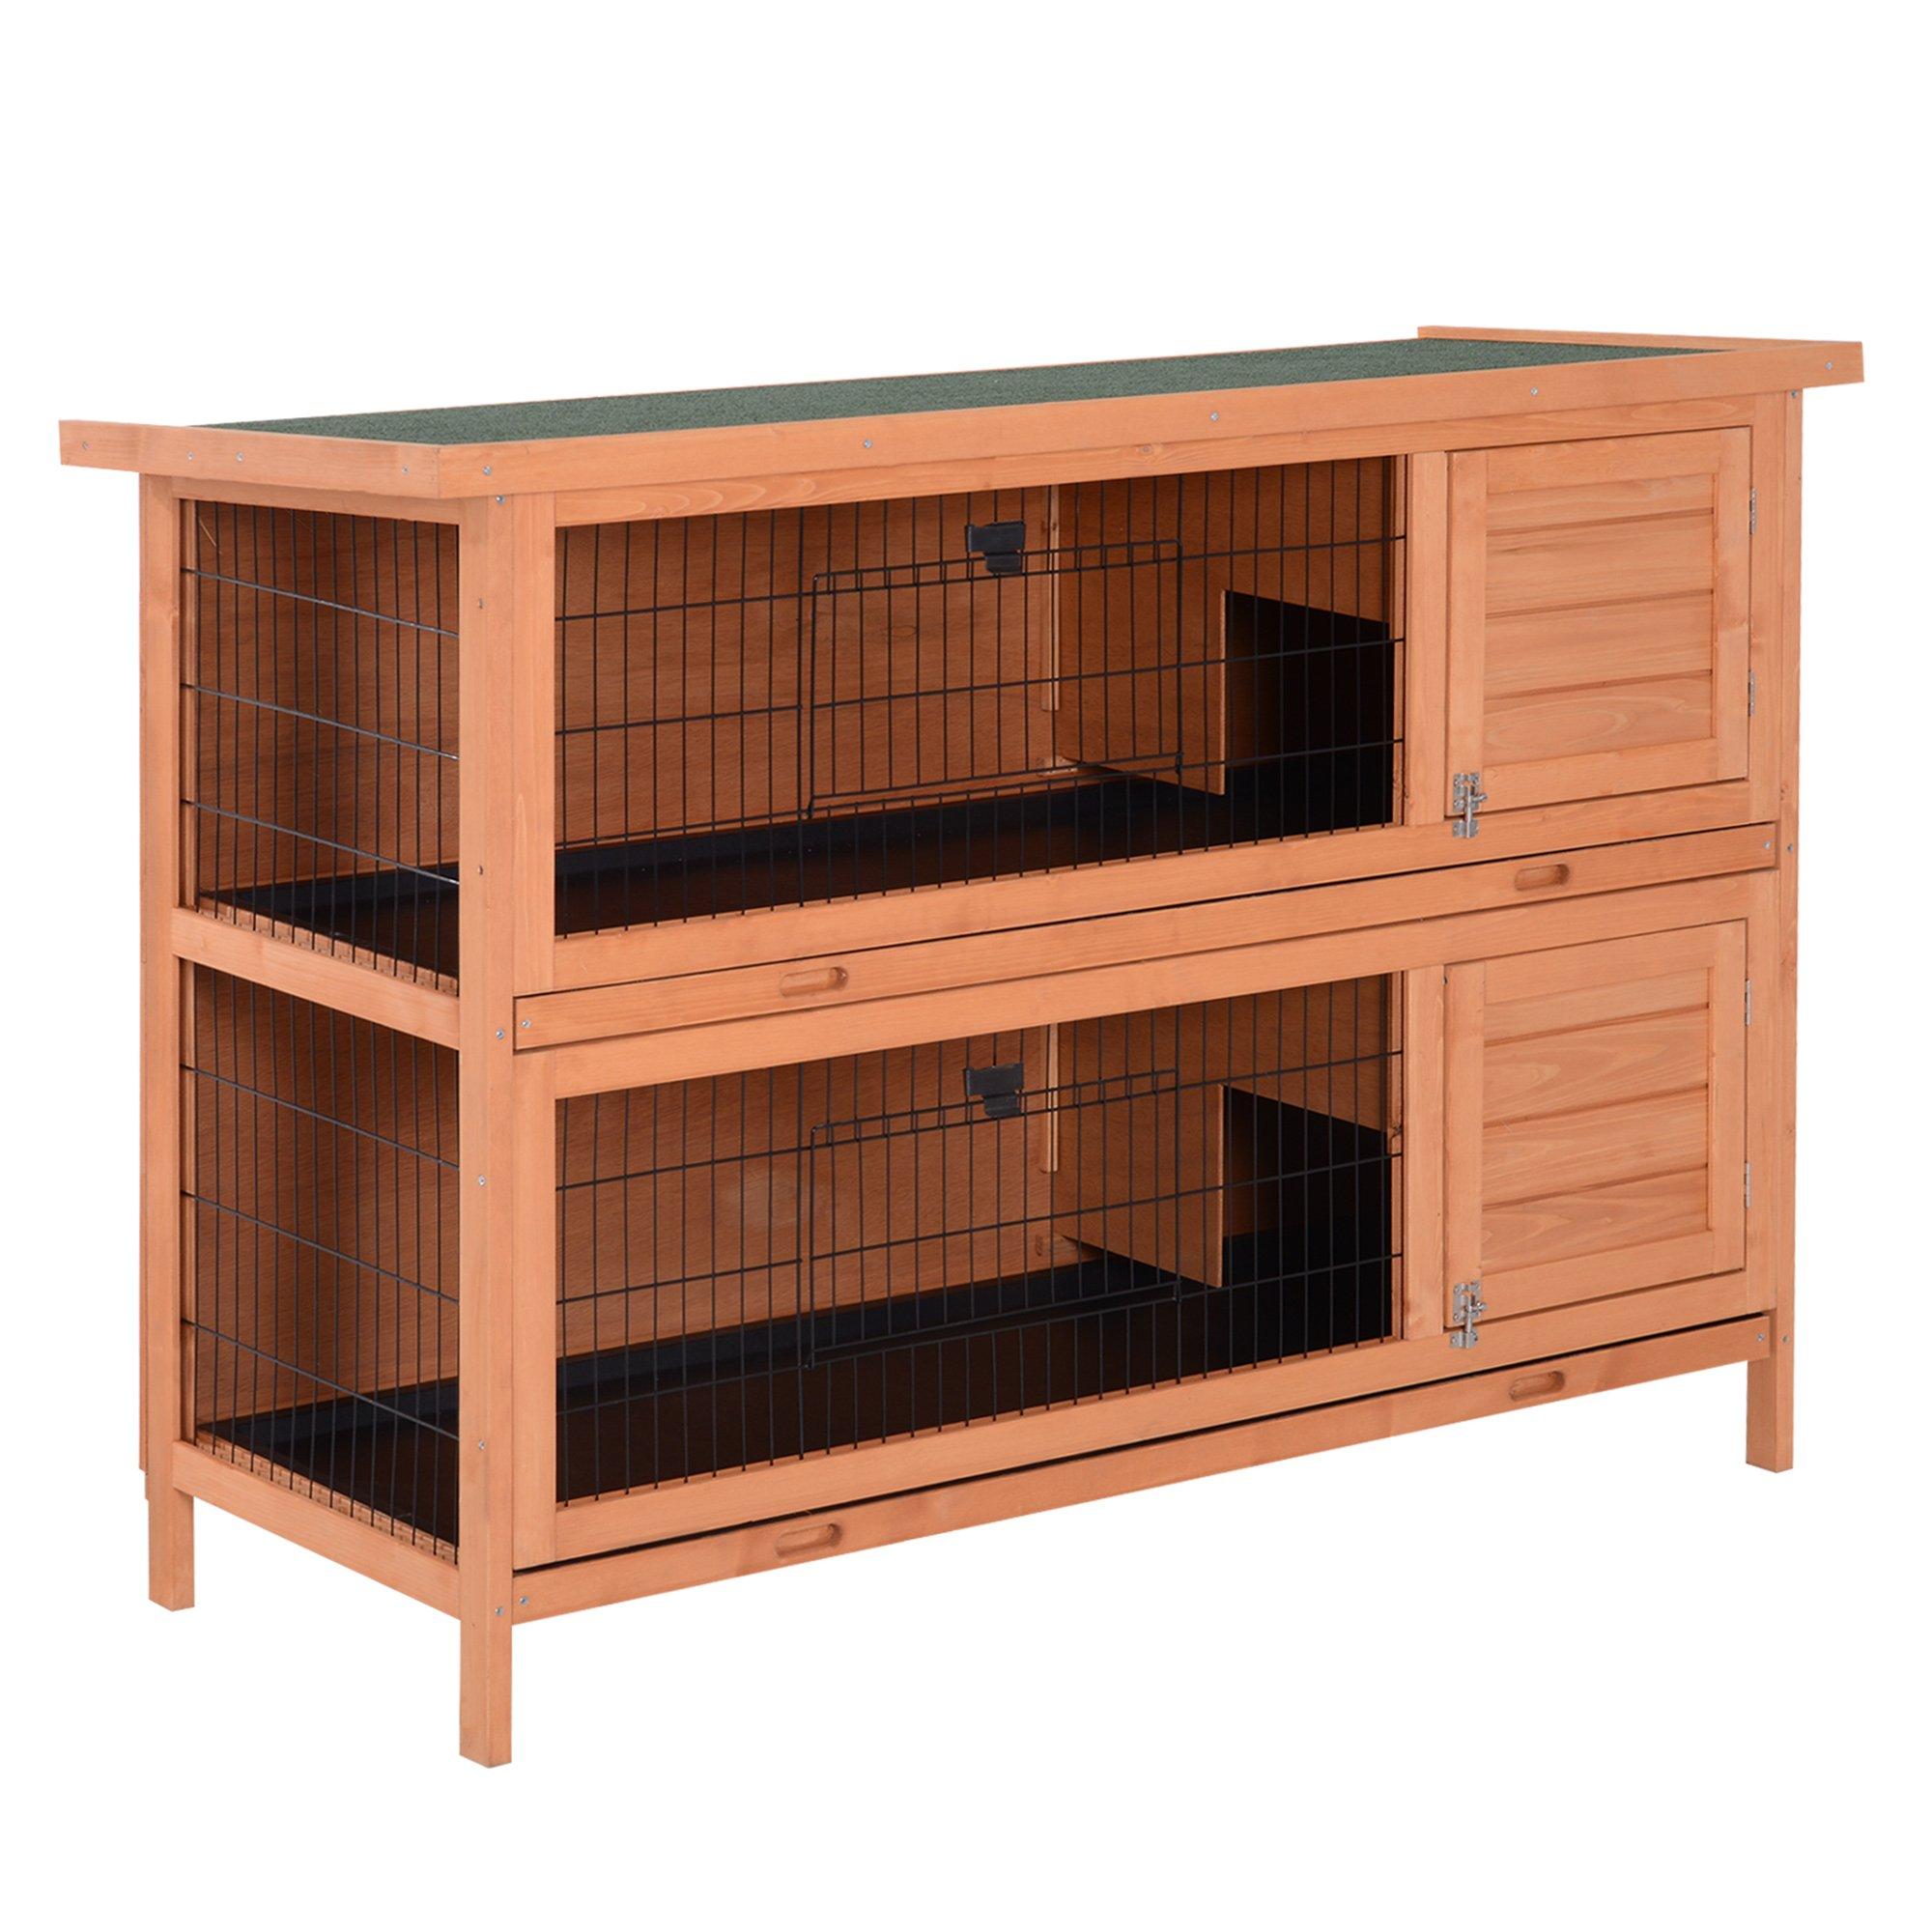 Rabbit Hutch for Two Rabbits Outdoor Guinea Pig Cage with Removable Tray